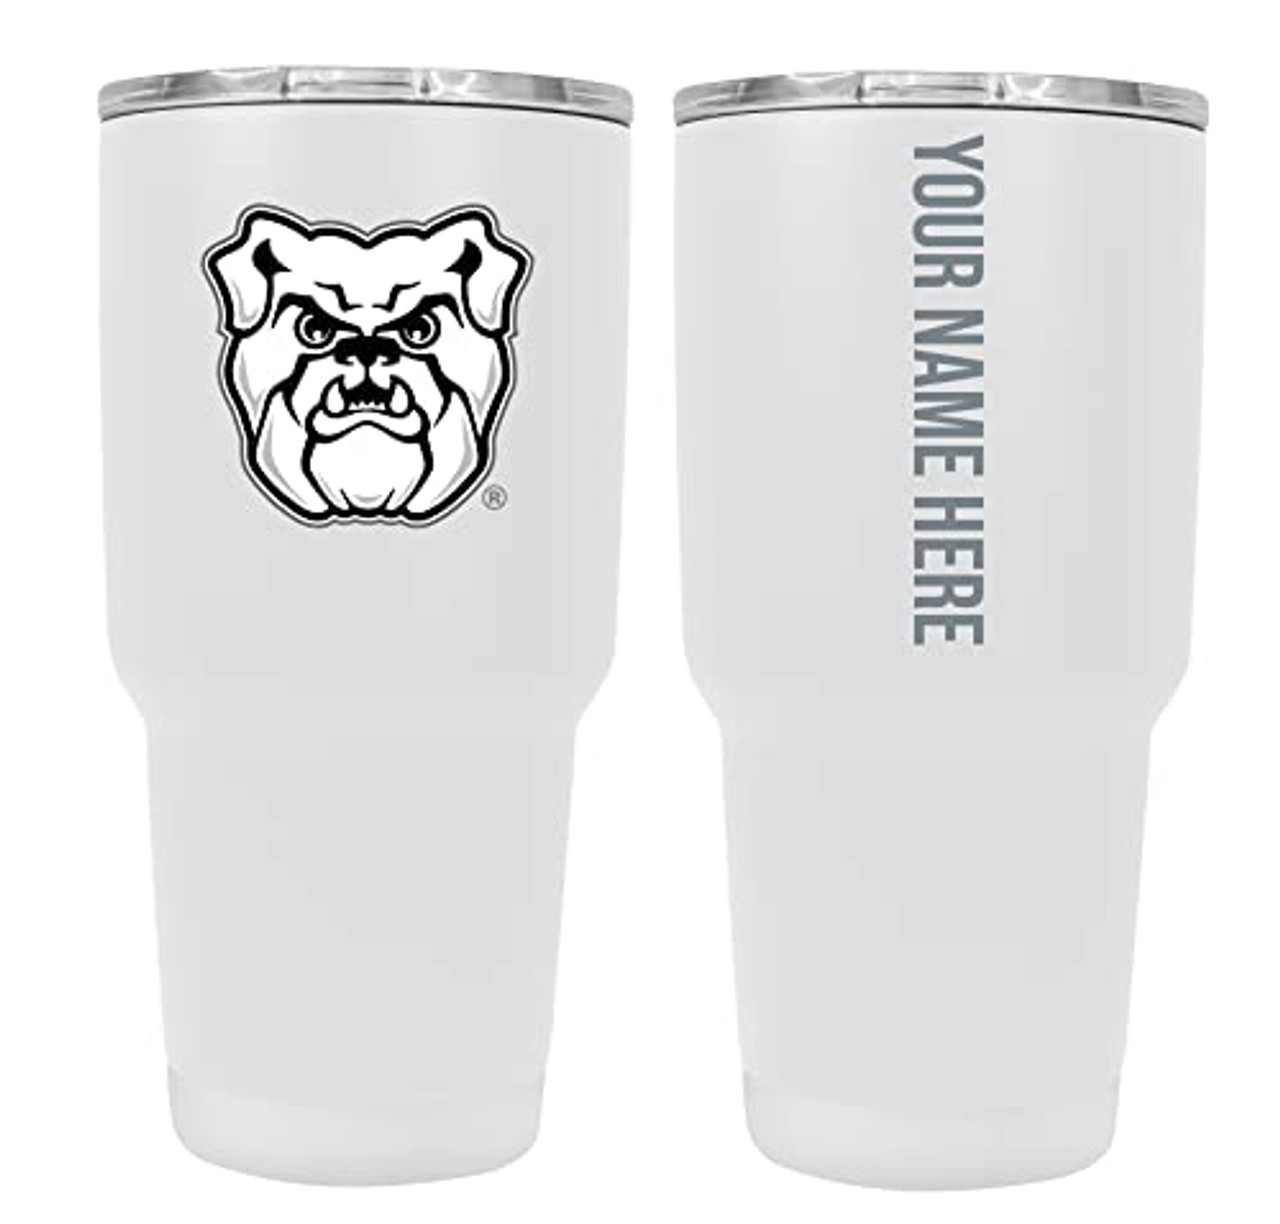 Collegiate Custom Personalized Butler Bulldogs, 24 oz Insulated Stainless Steel Tumbler with Engraved Name (White)